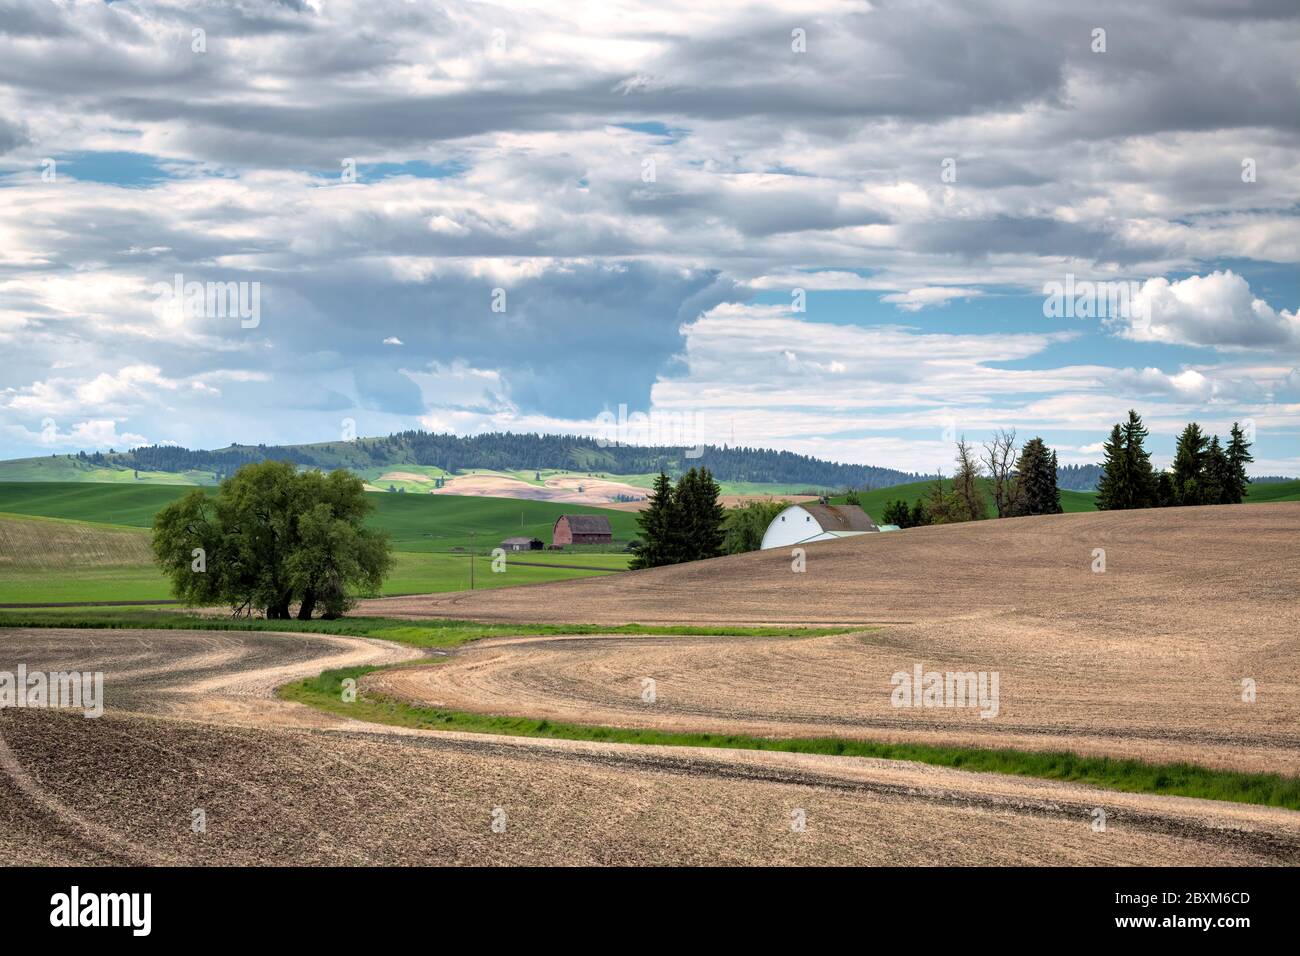 Two barns nestled in the rolling hilly farmland of the Palouse region of Washington state, with trees and clouds in the sky. Stock Photo